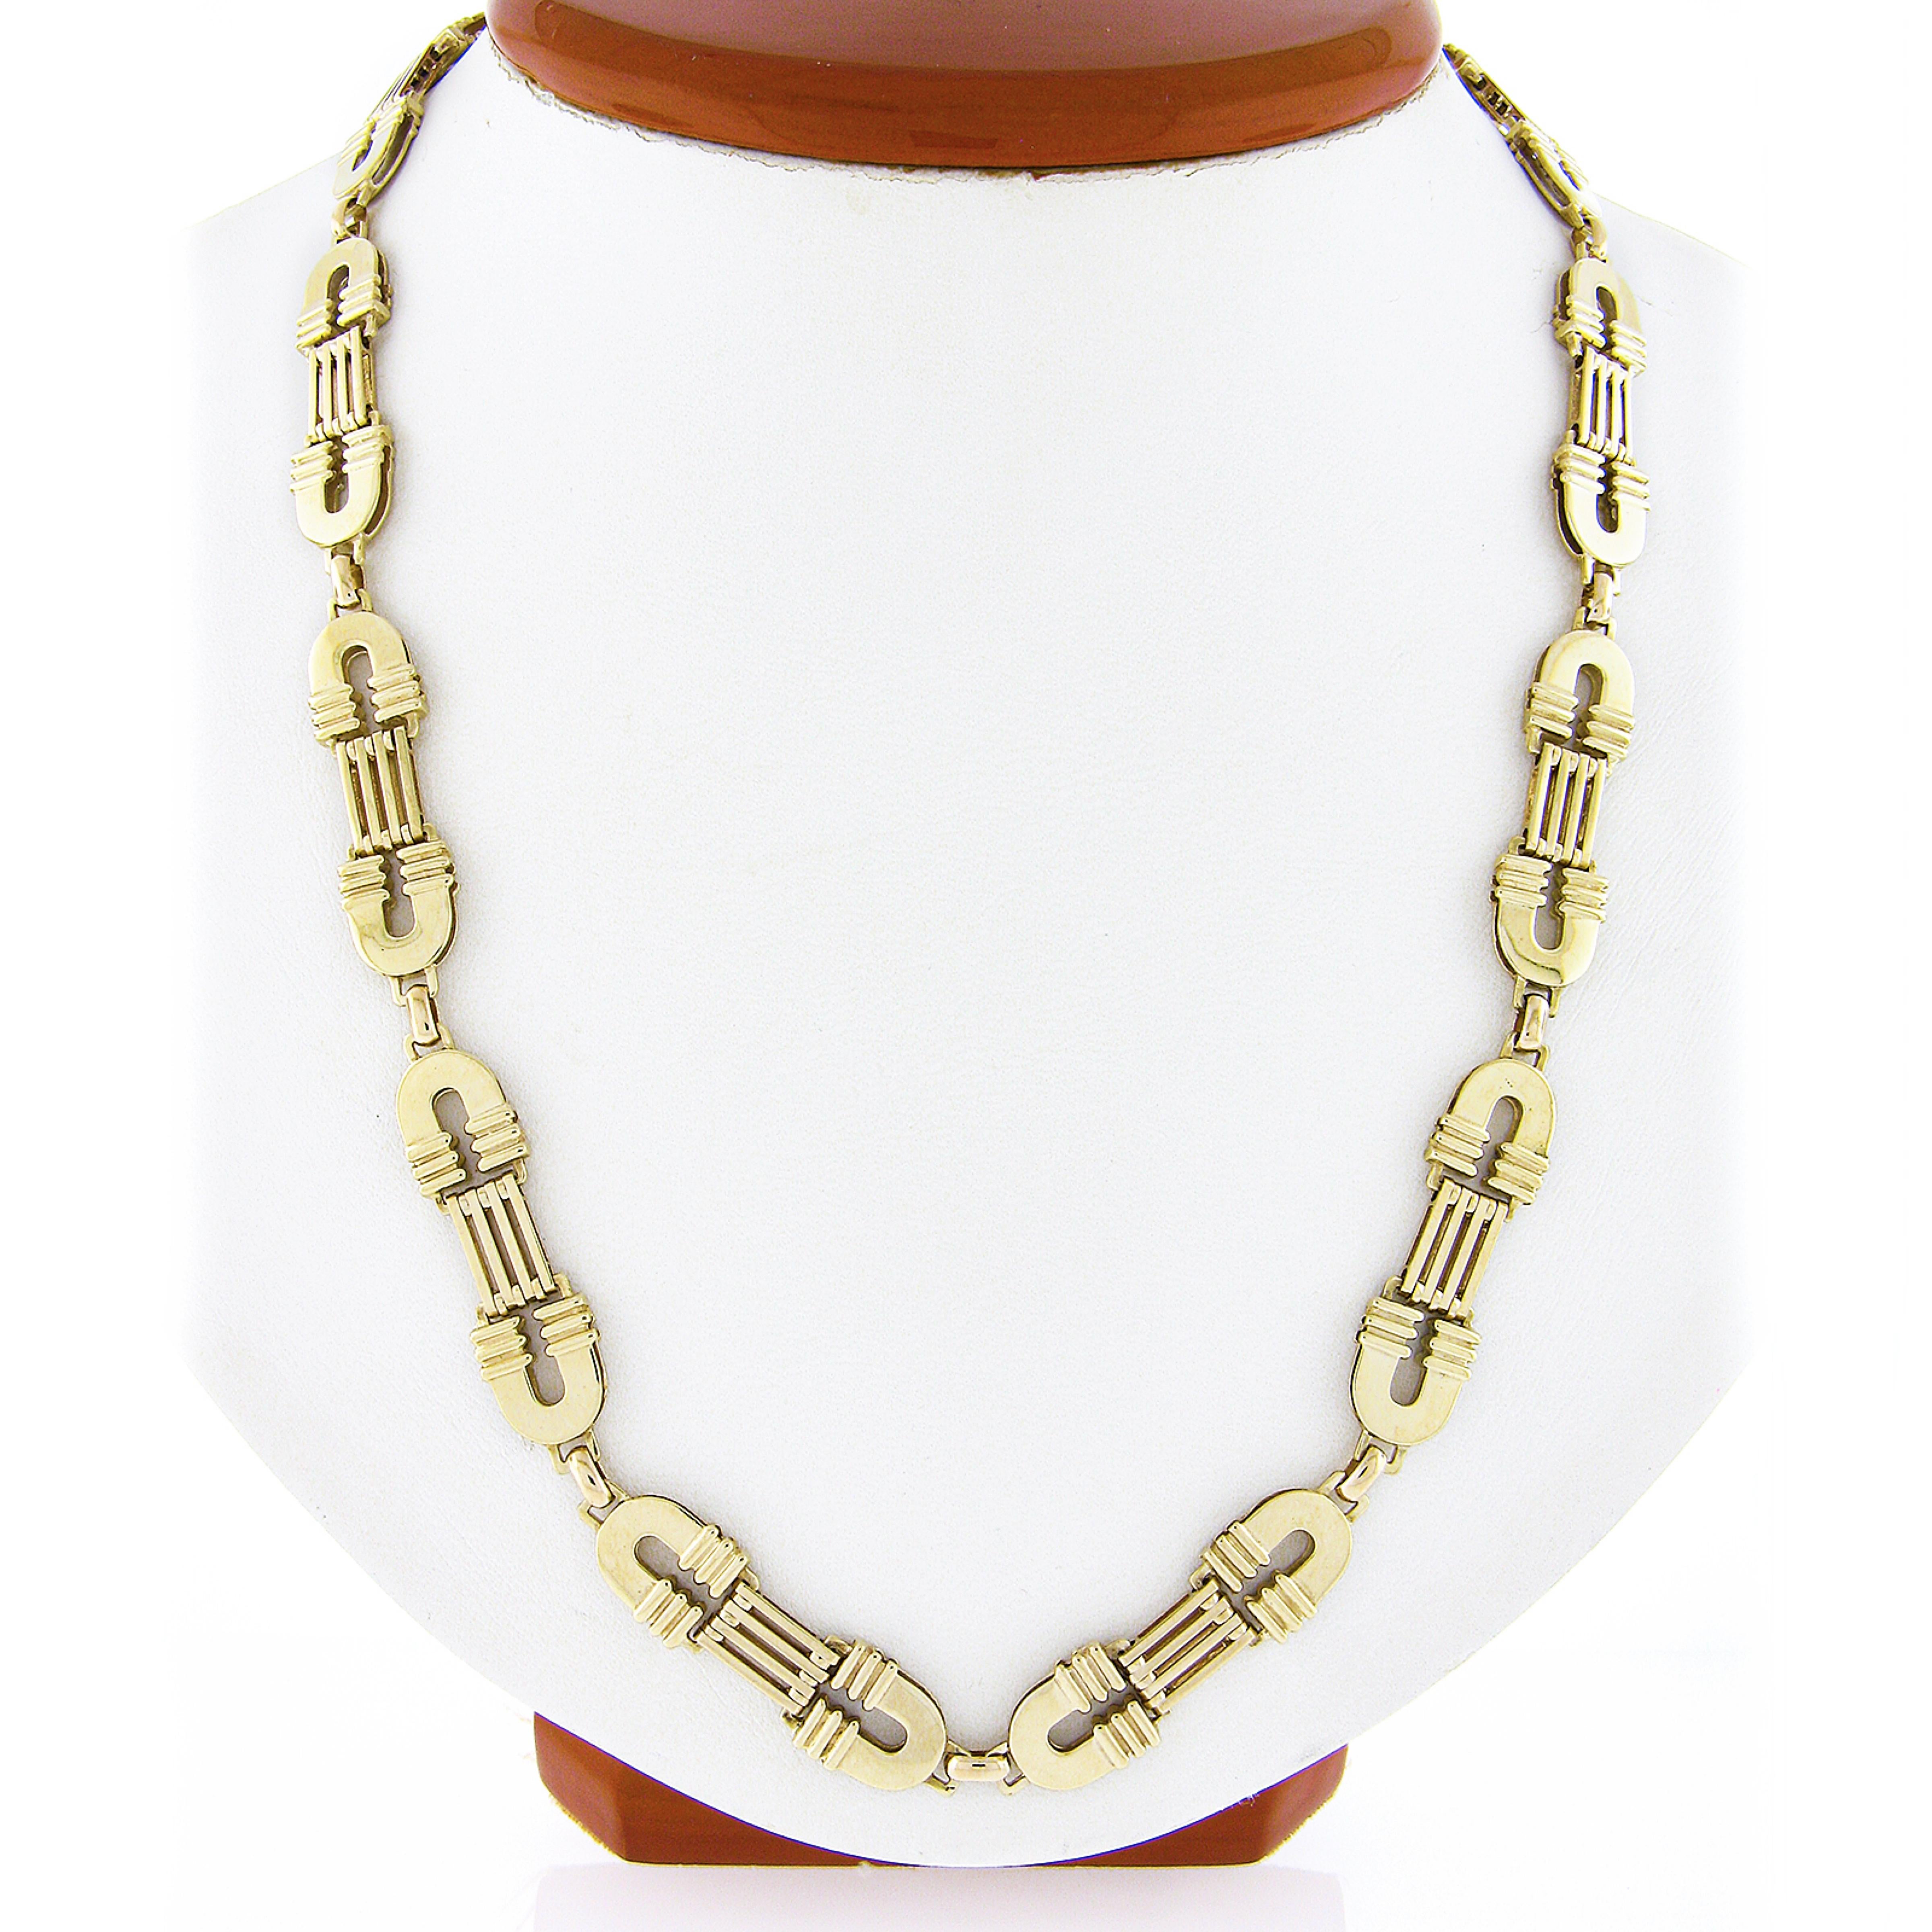 This fancy and well made chain necklace was crafted in Italy from solid 14k yellow gold. The beautiful handmade chain has a very unique design that is constructed from high-polished flexible links neatly interlocking throughout and attaches with an